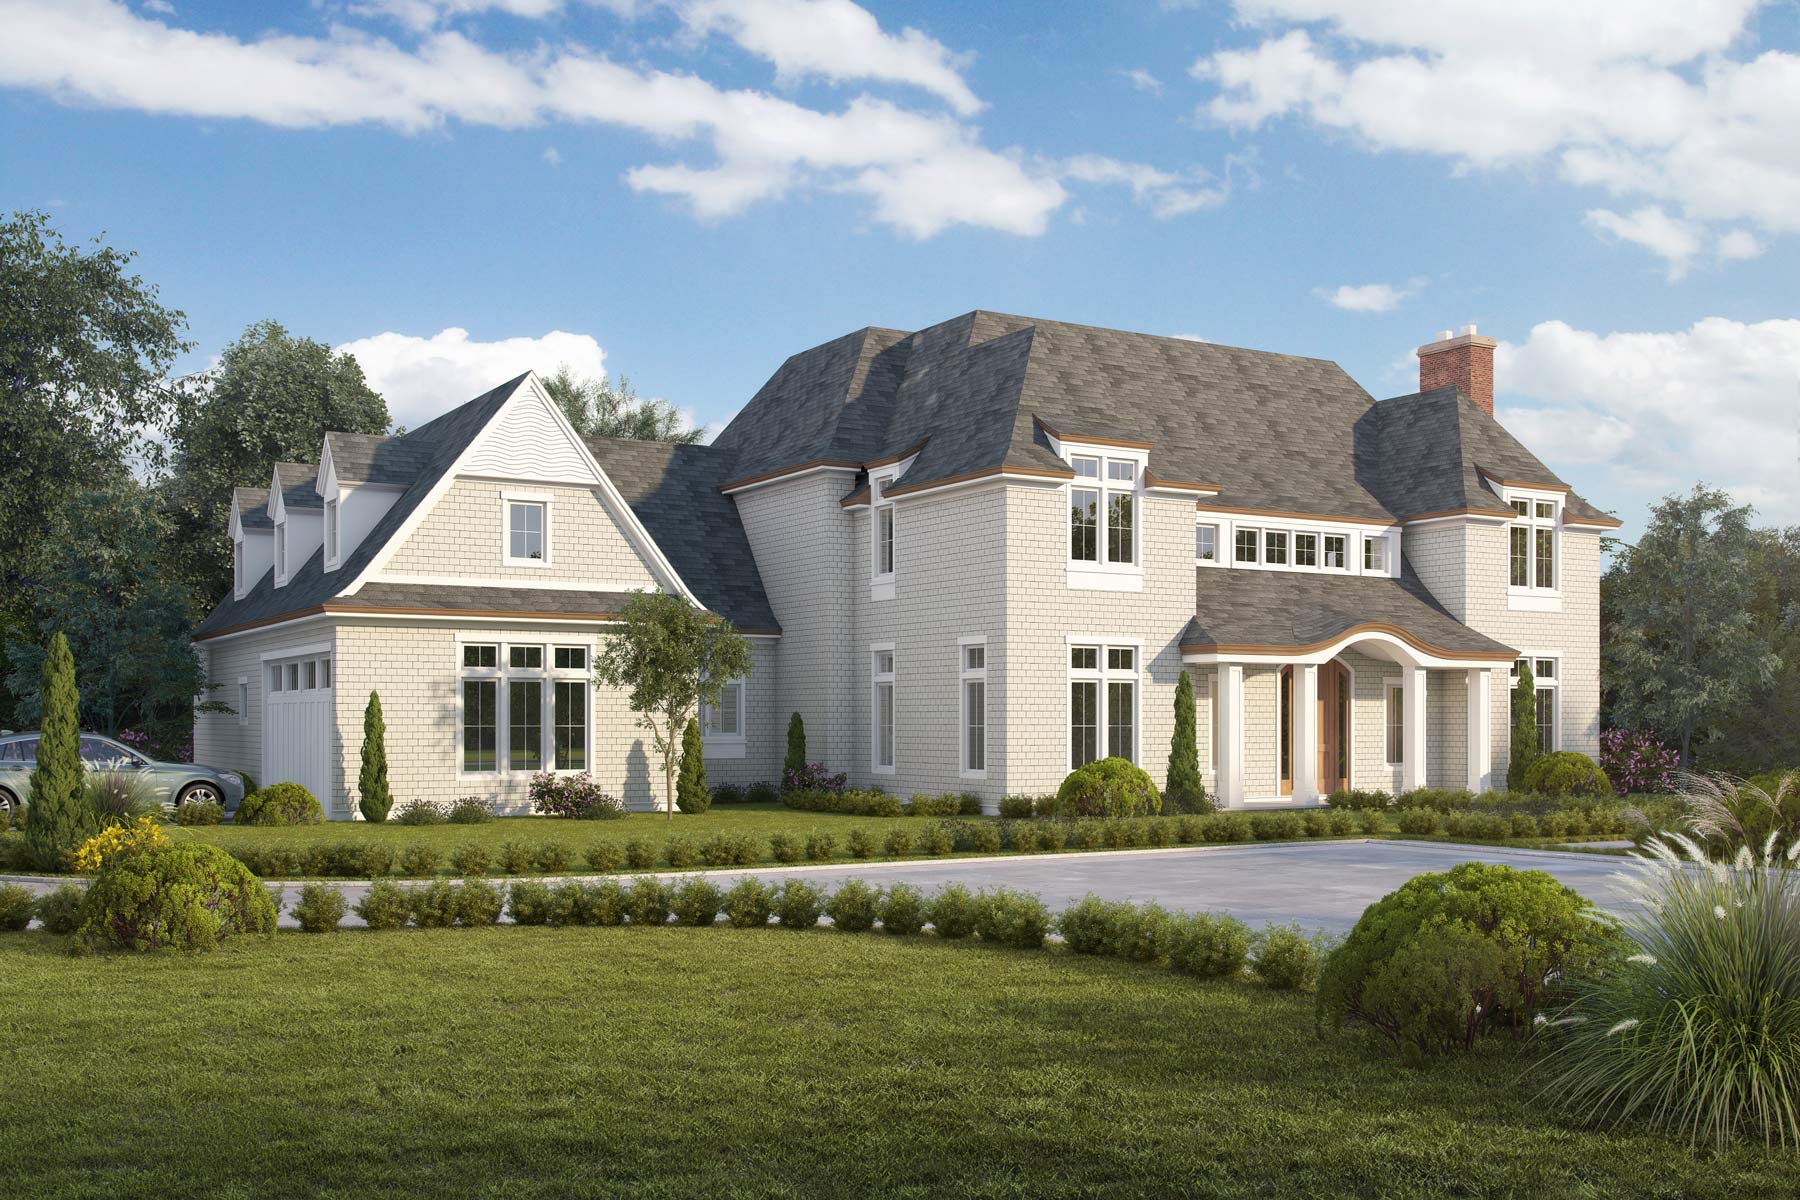 Sands Point Shingle Style Home Design Architecture